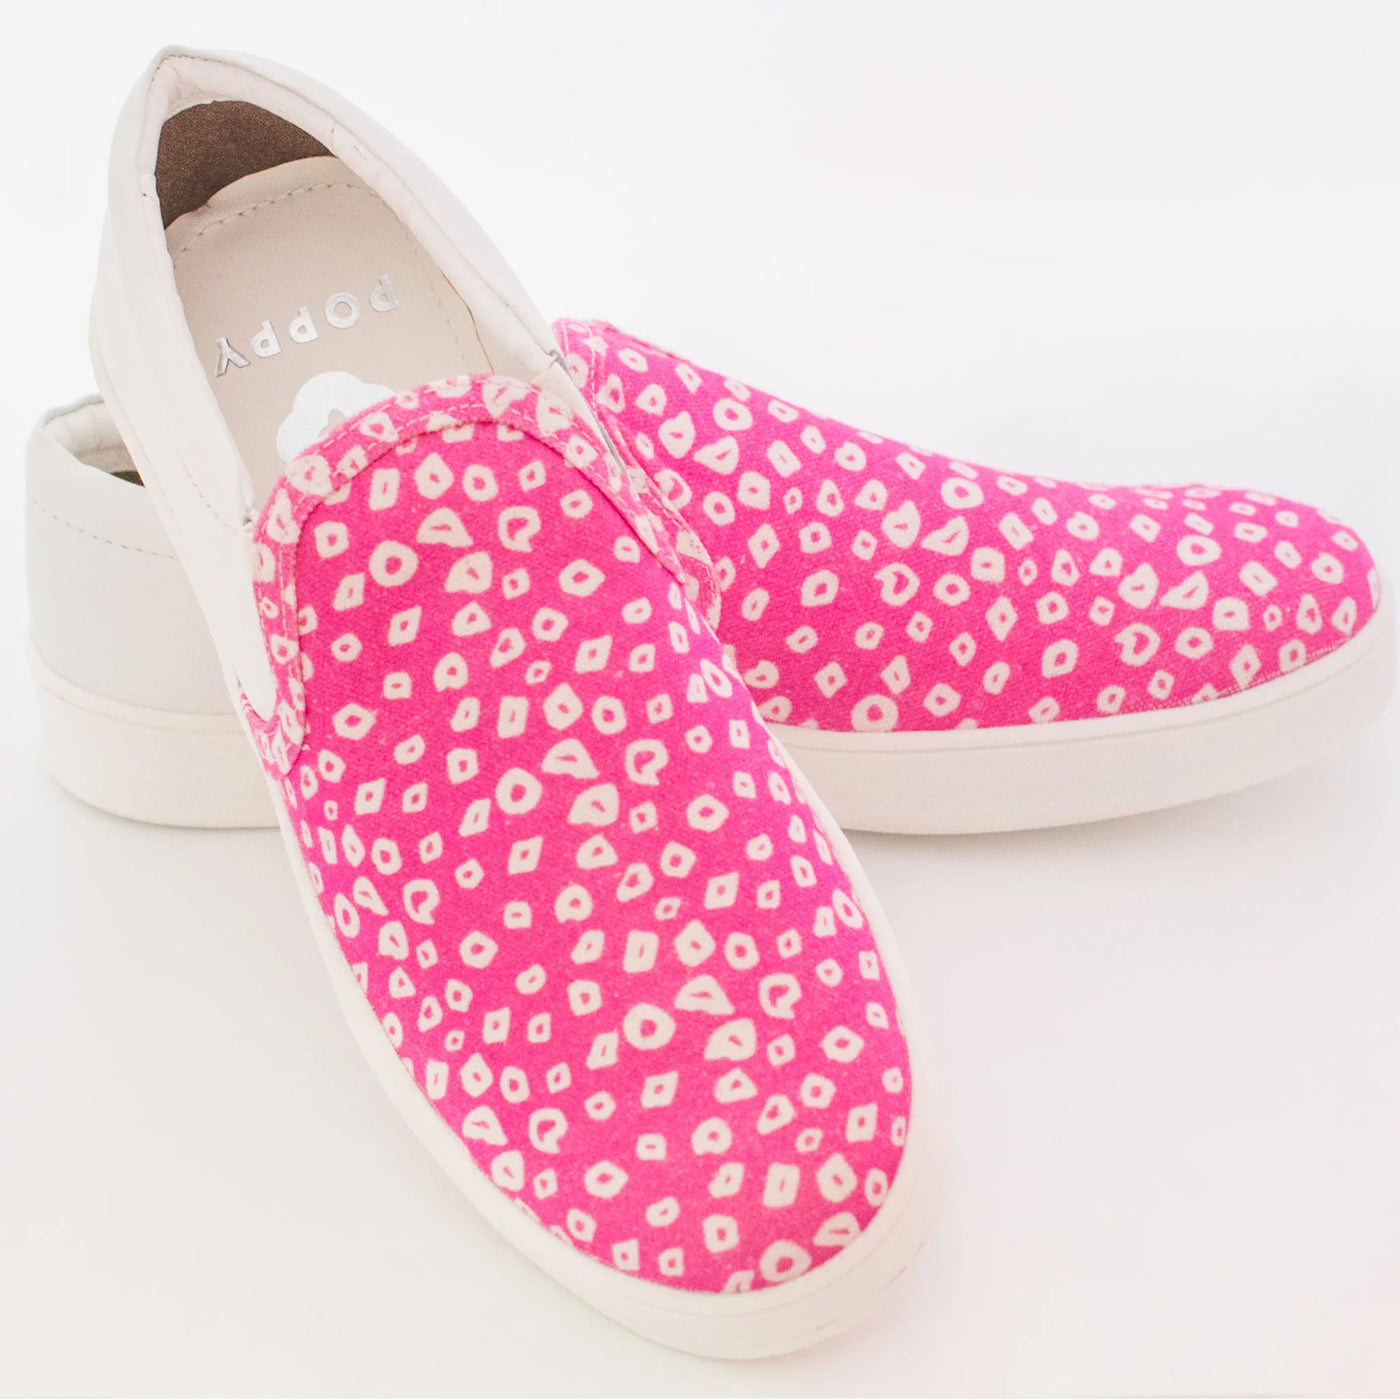 Samaira Shoes by Poppy Shoes